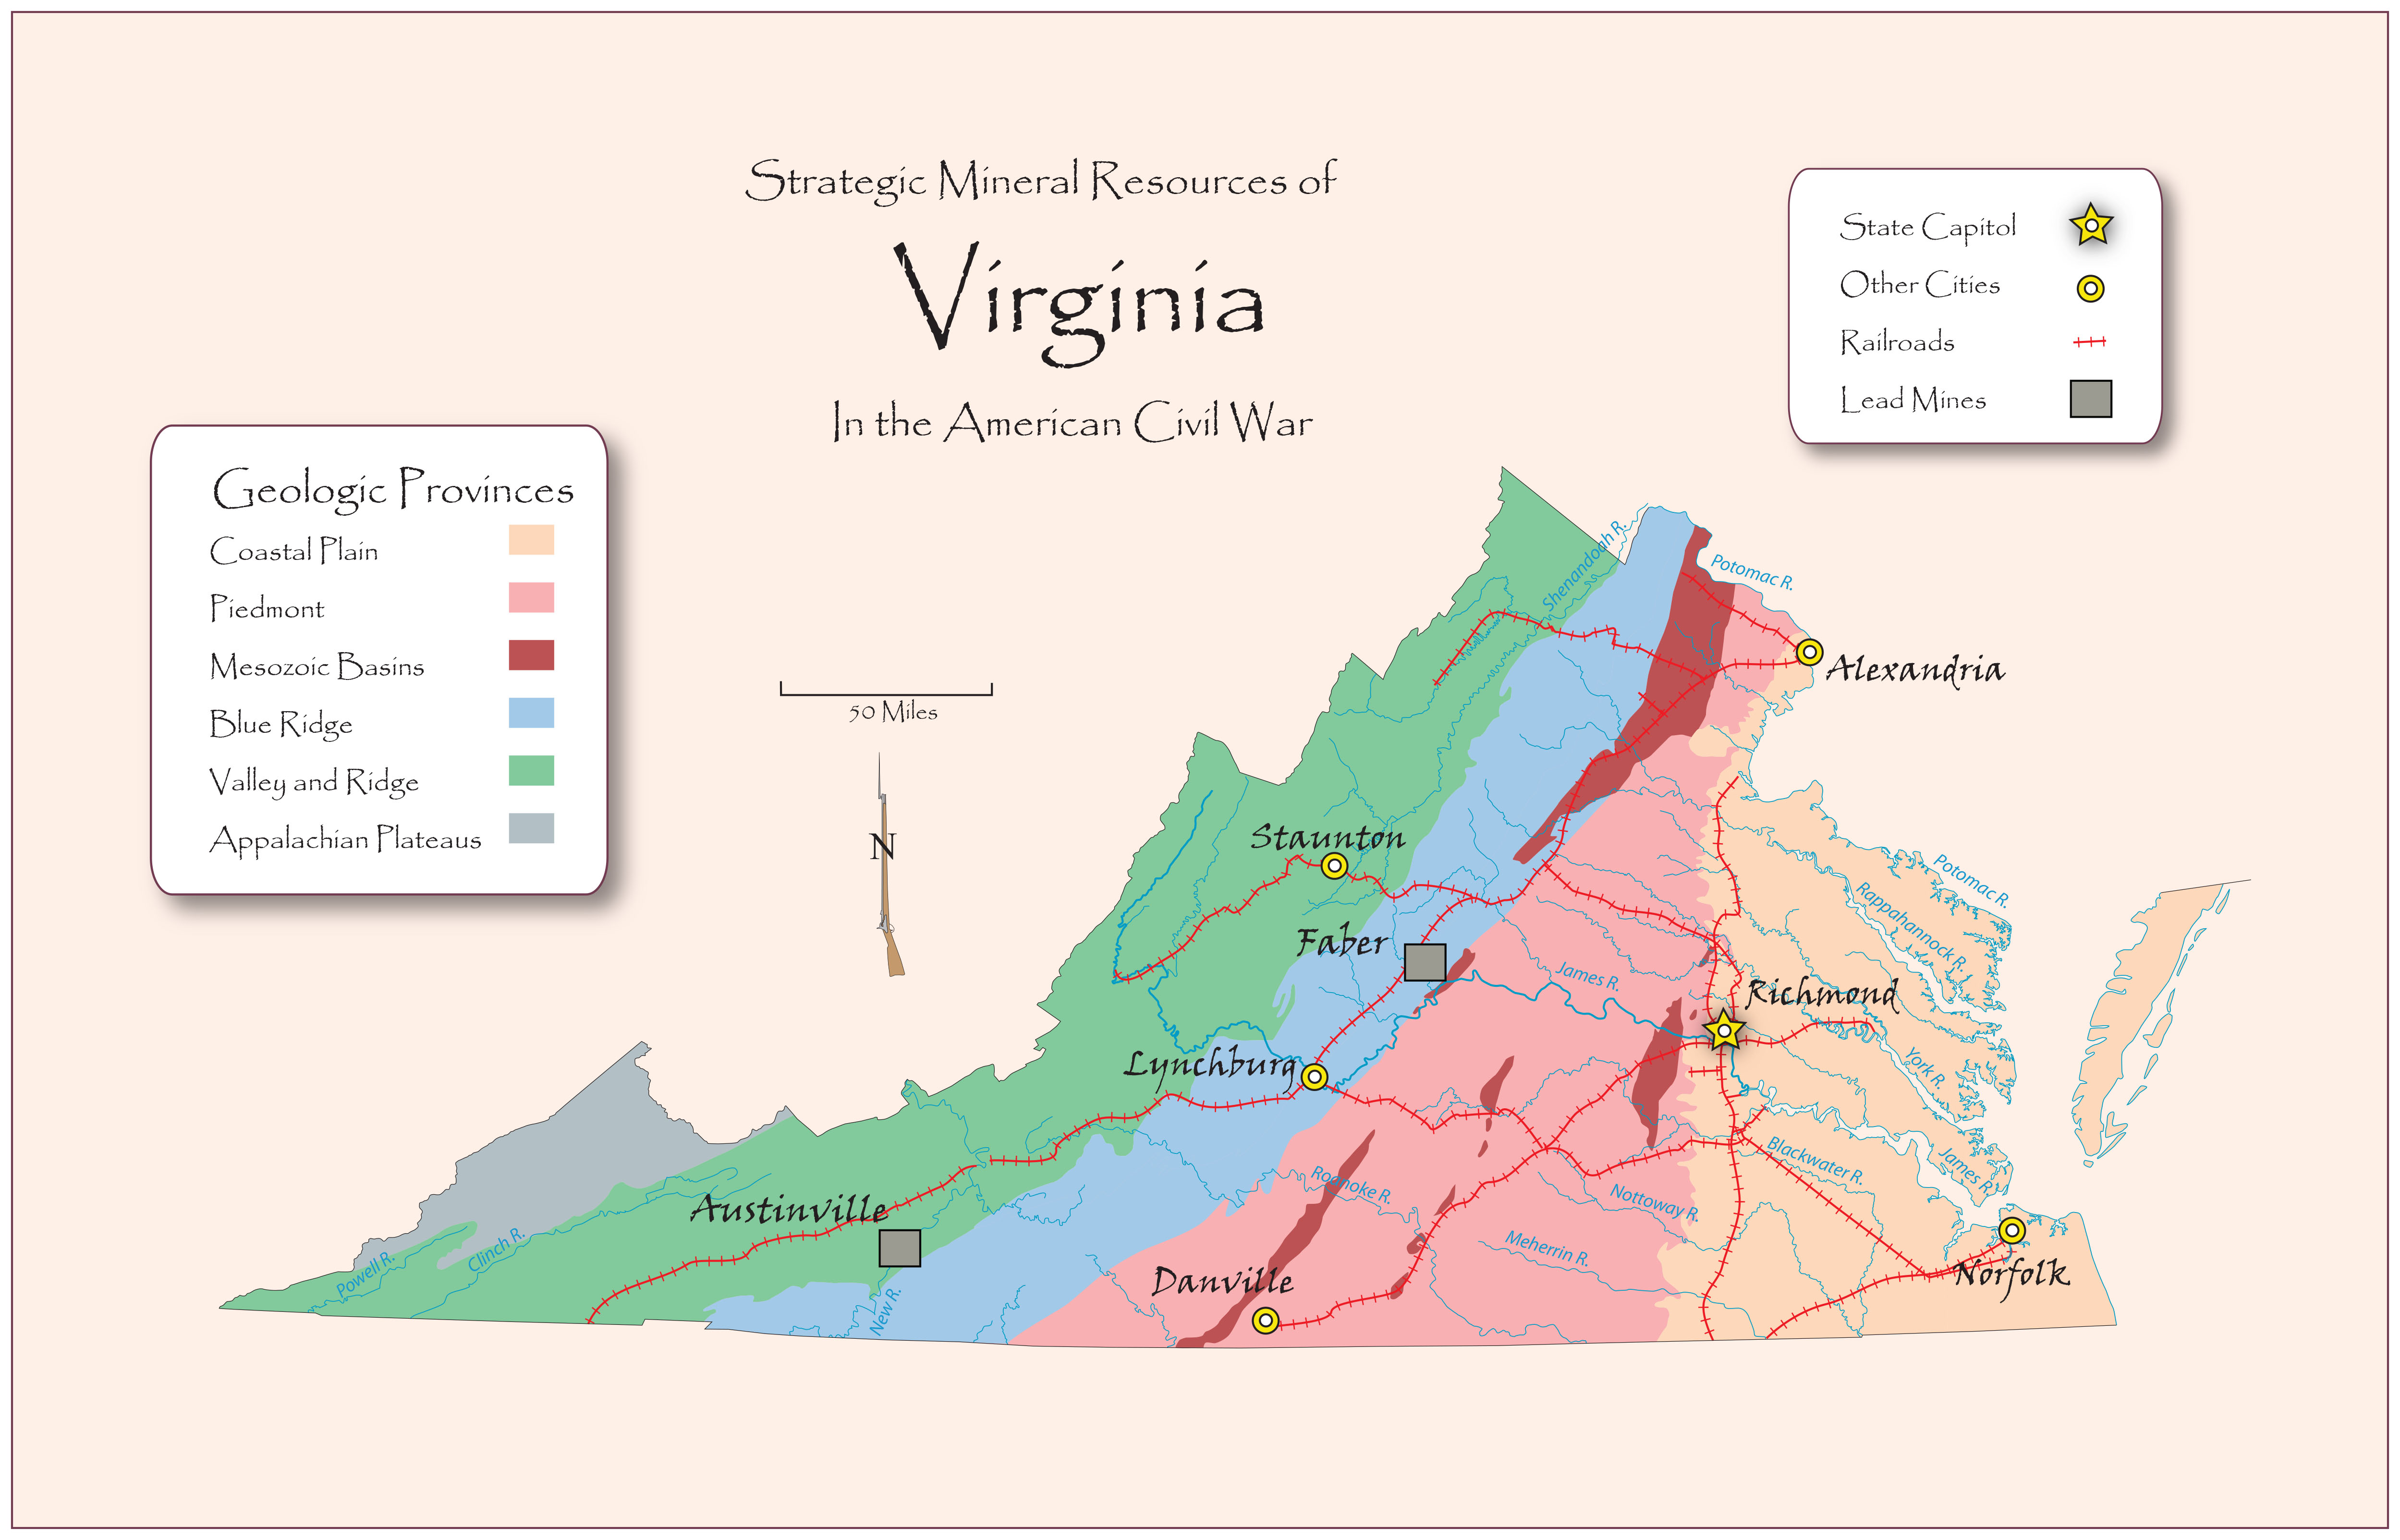 Strategic Mineral Resources of Virginia in the American Civil War - Lead